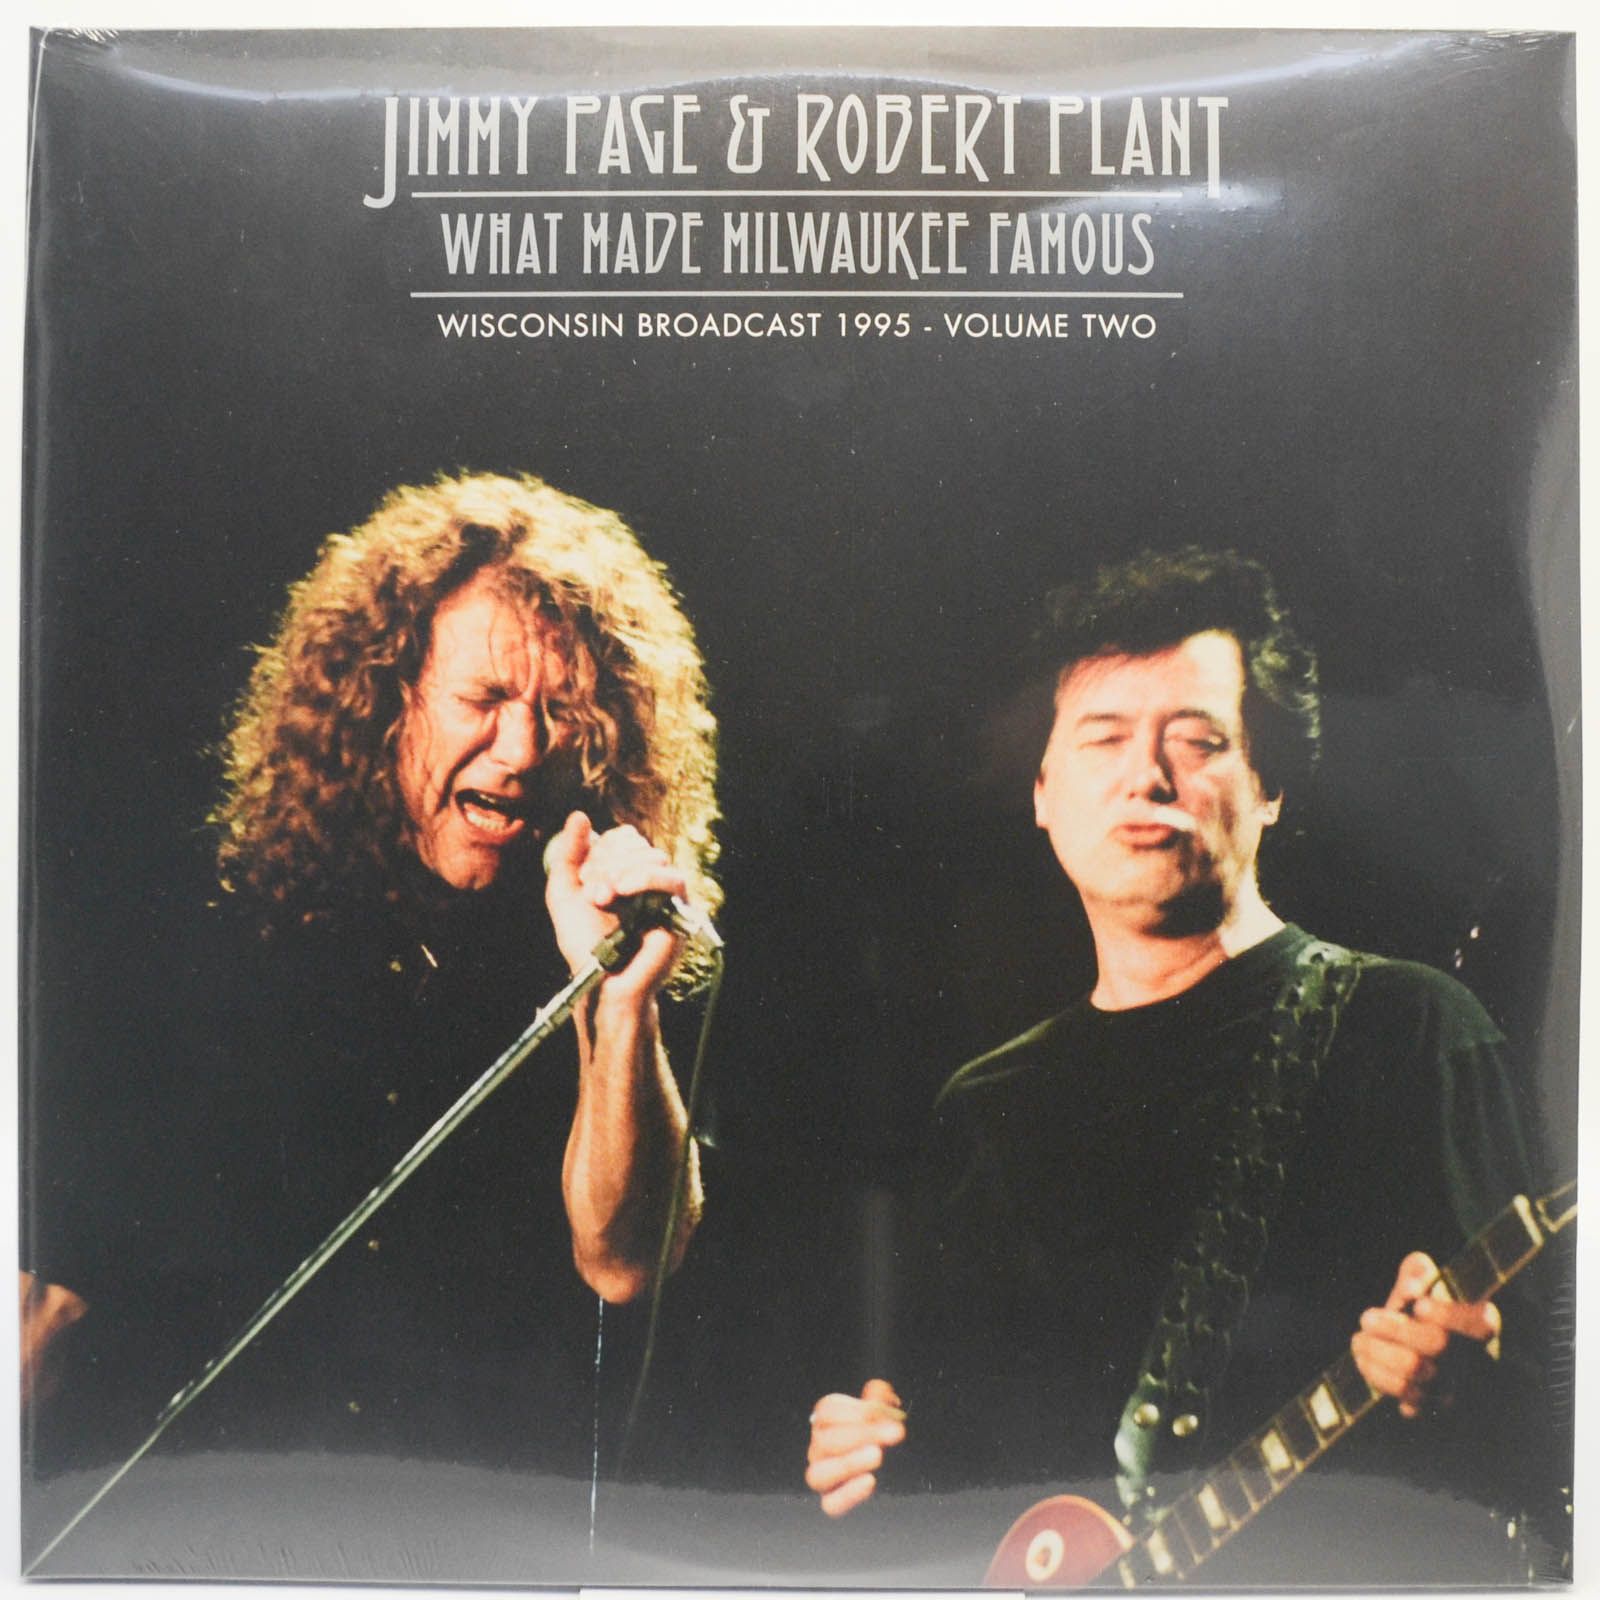 Jimmy Page & Robert Plant — What Made Milwaukee Famous Volume Two (2LP), 2021